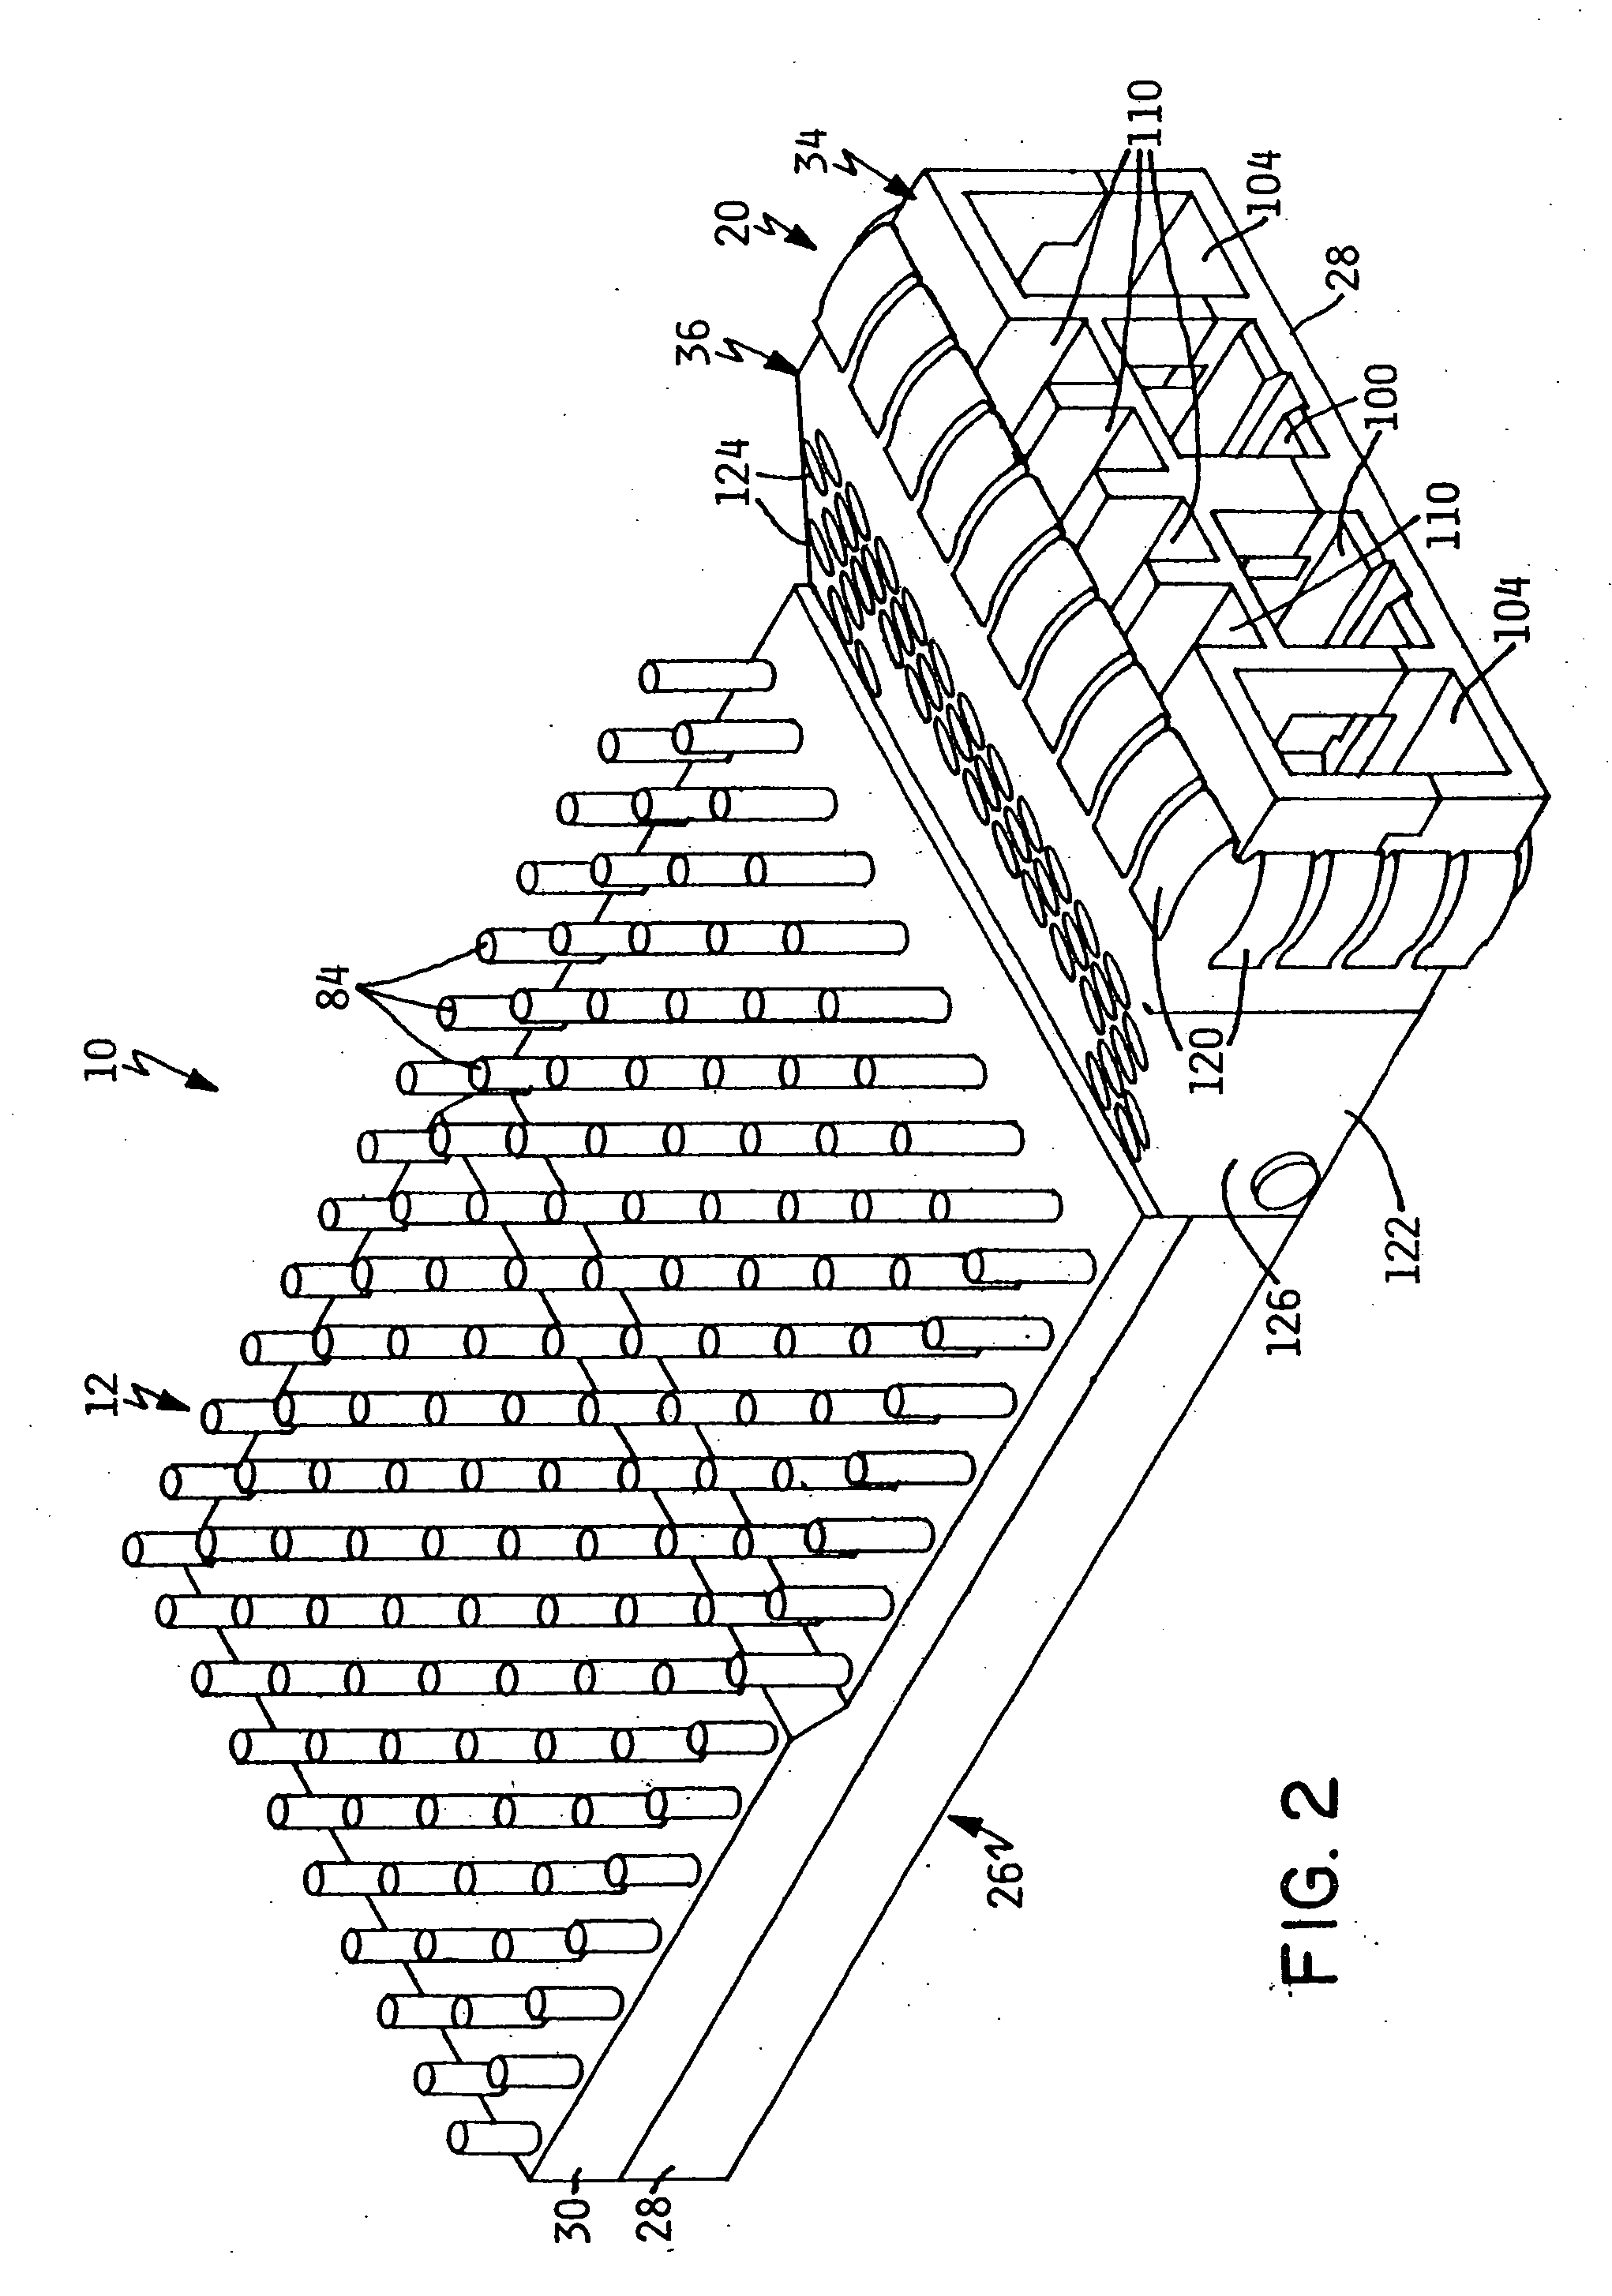 Compact optical transceivers including thermal distributing and electromagnetic shielding systems and methods thereof